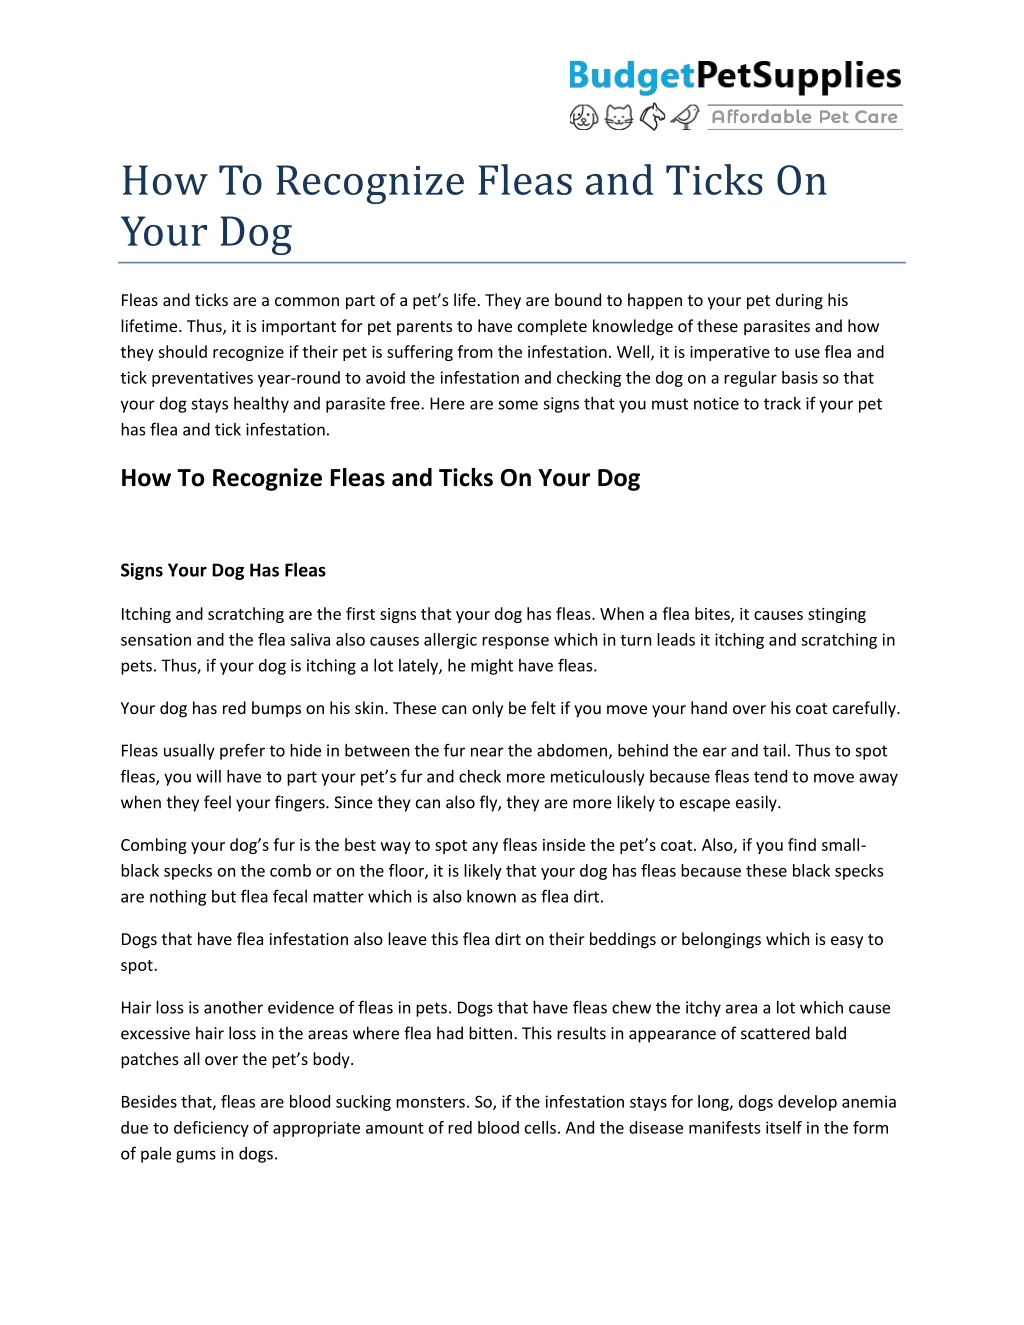 how to recognize fleas and ticks on your dog